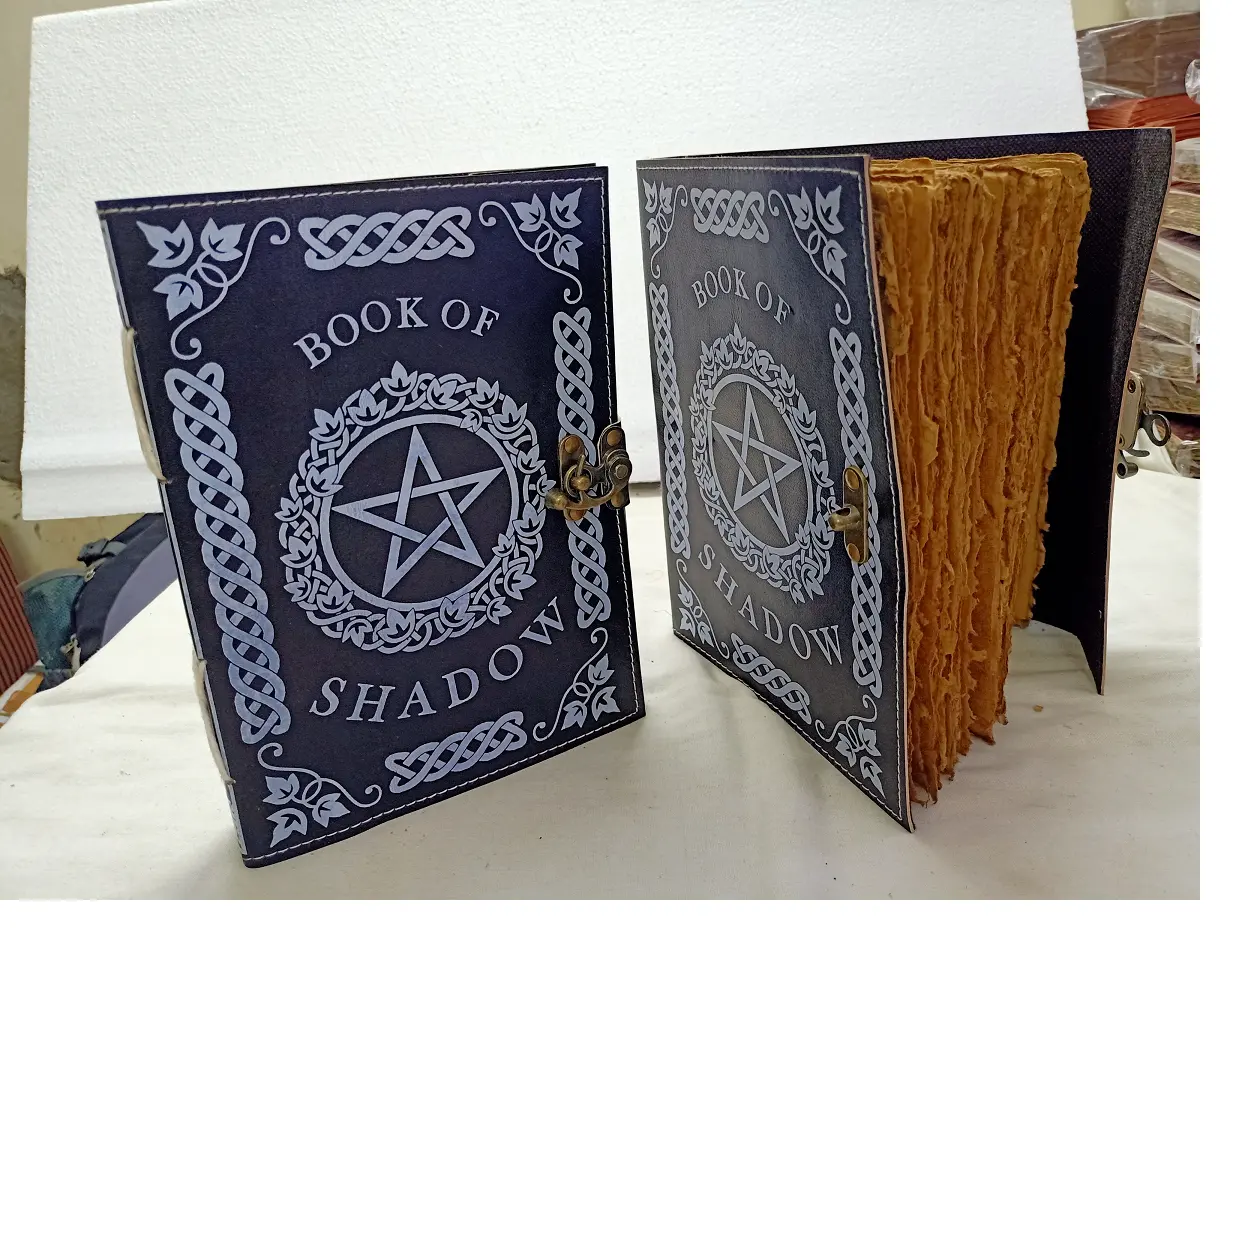 custom made leather journals with deckle edged antique look papers with book of shadow